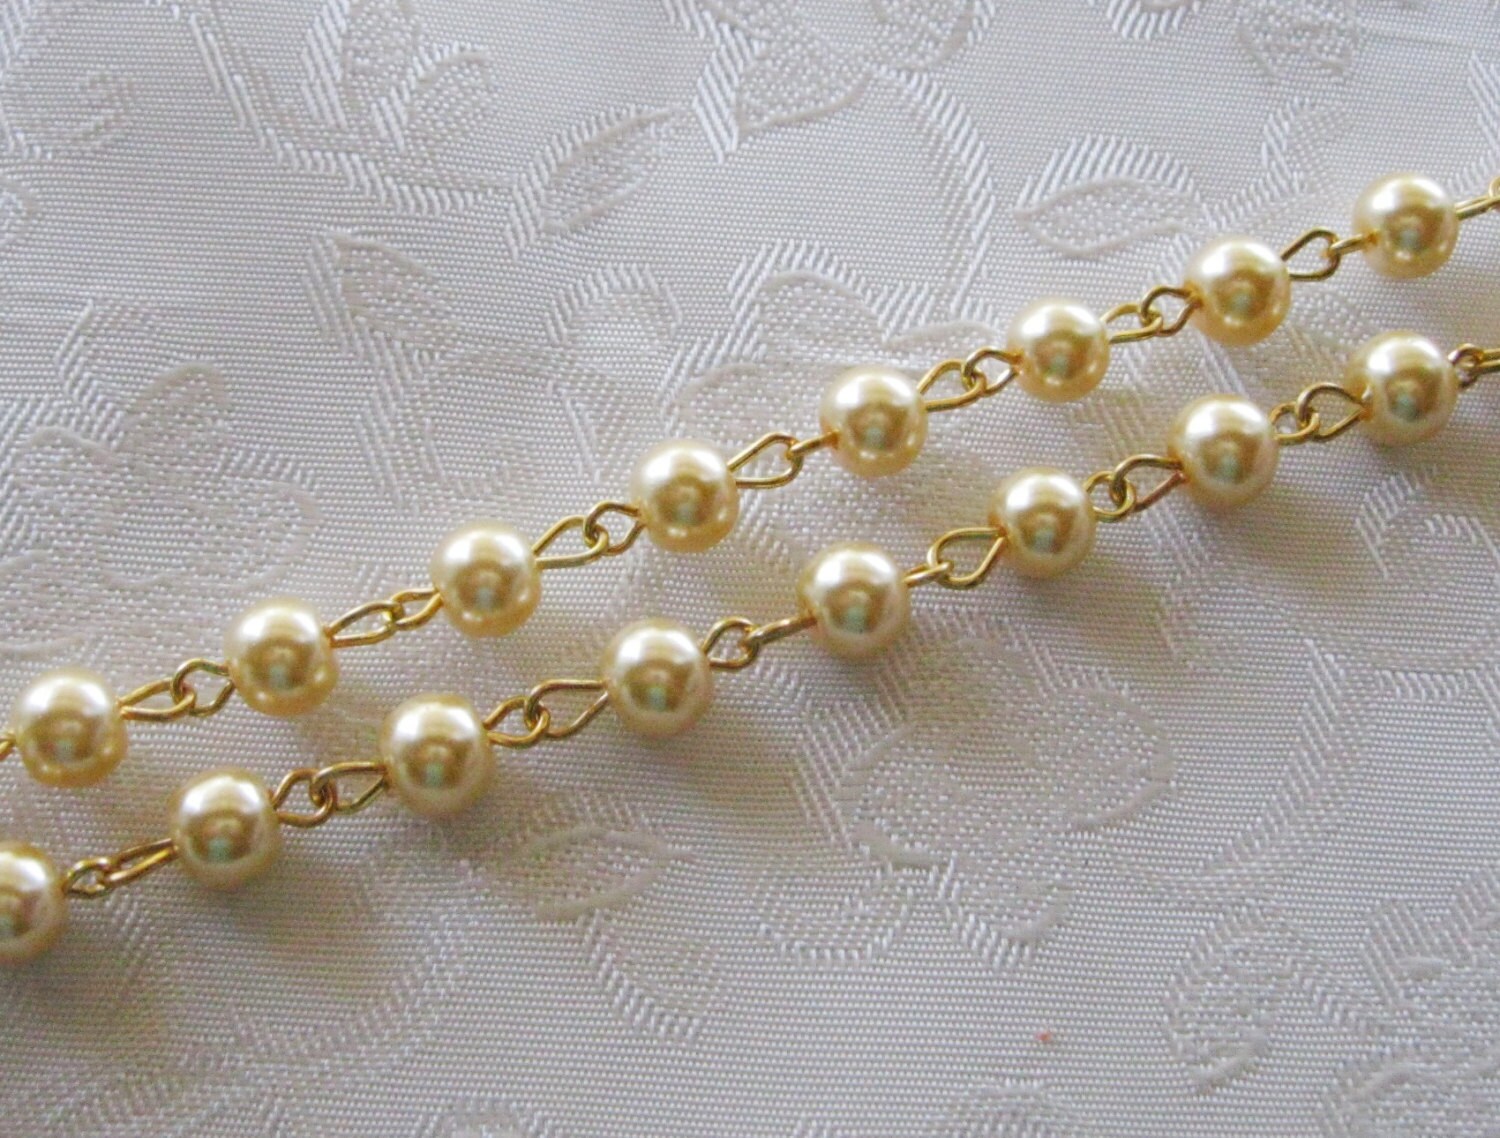 LAPYAPPE 1pc Glass Pearl Bracelet Pearl Rosary Jewelry String for